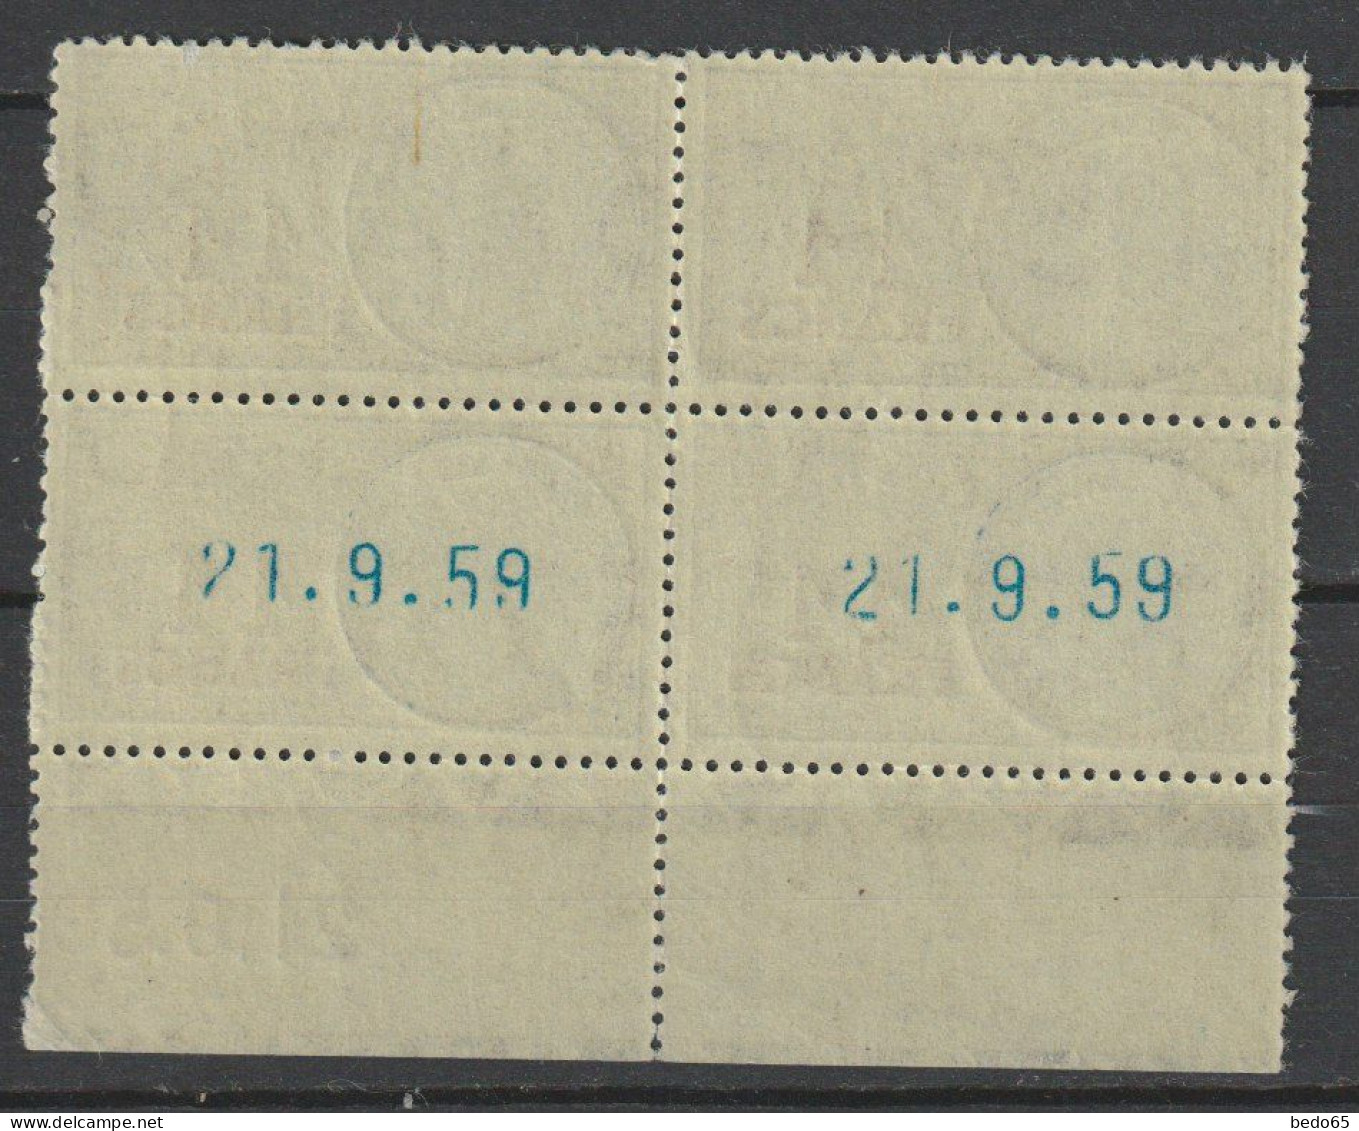 FISCAL  N°  144 / Long Serif / BLOC DE 4 COIN DATE 1959 NEUF ** LUXE SANS CHARNIERE / MNH - Stamps